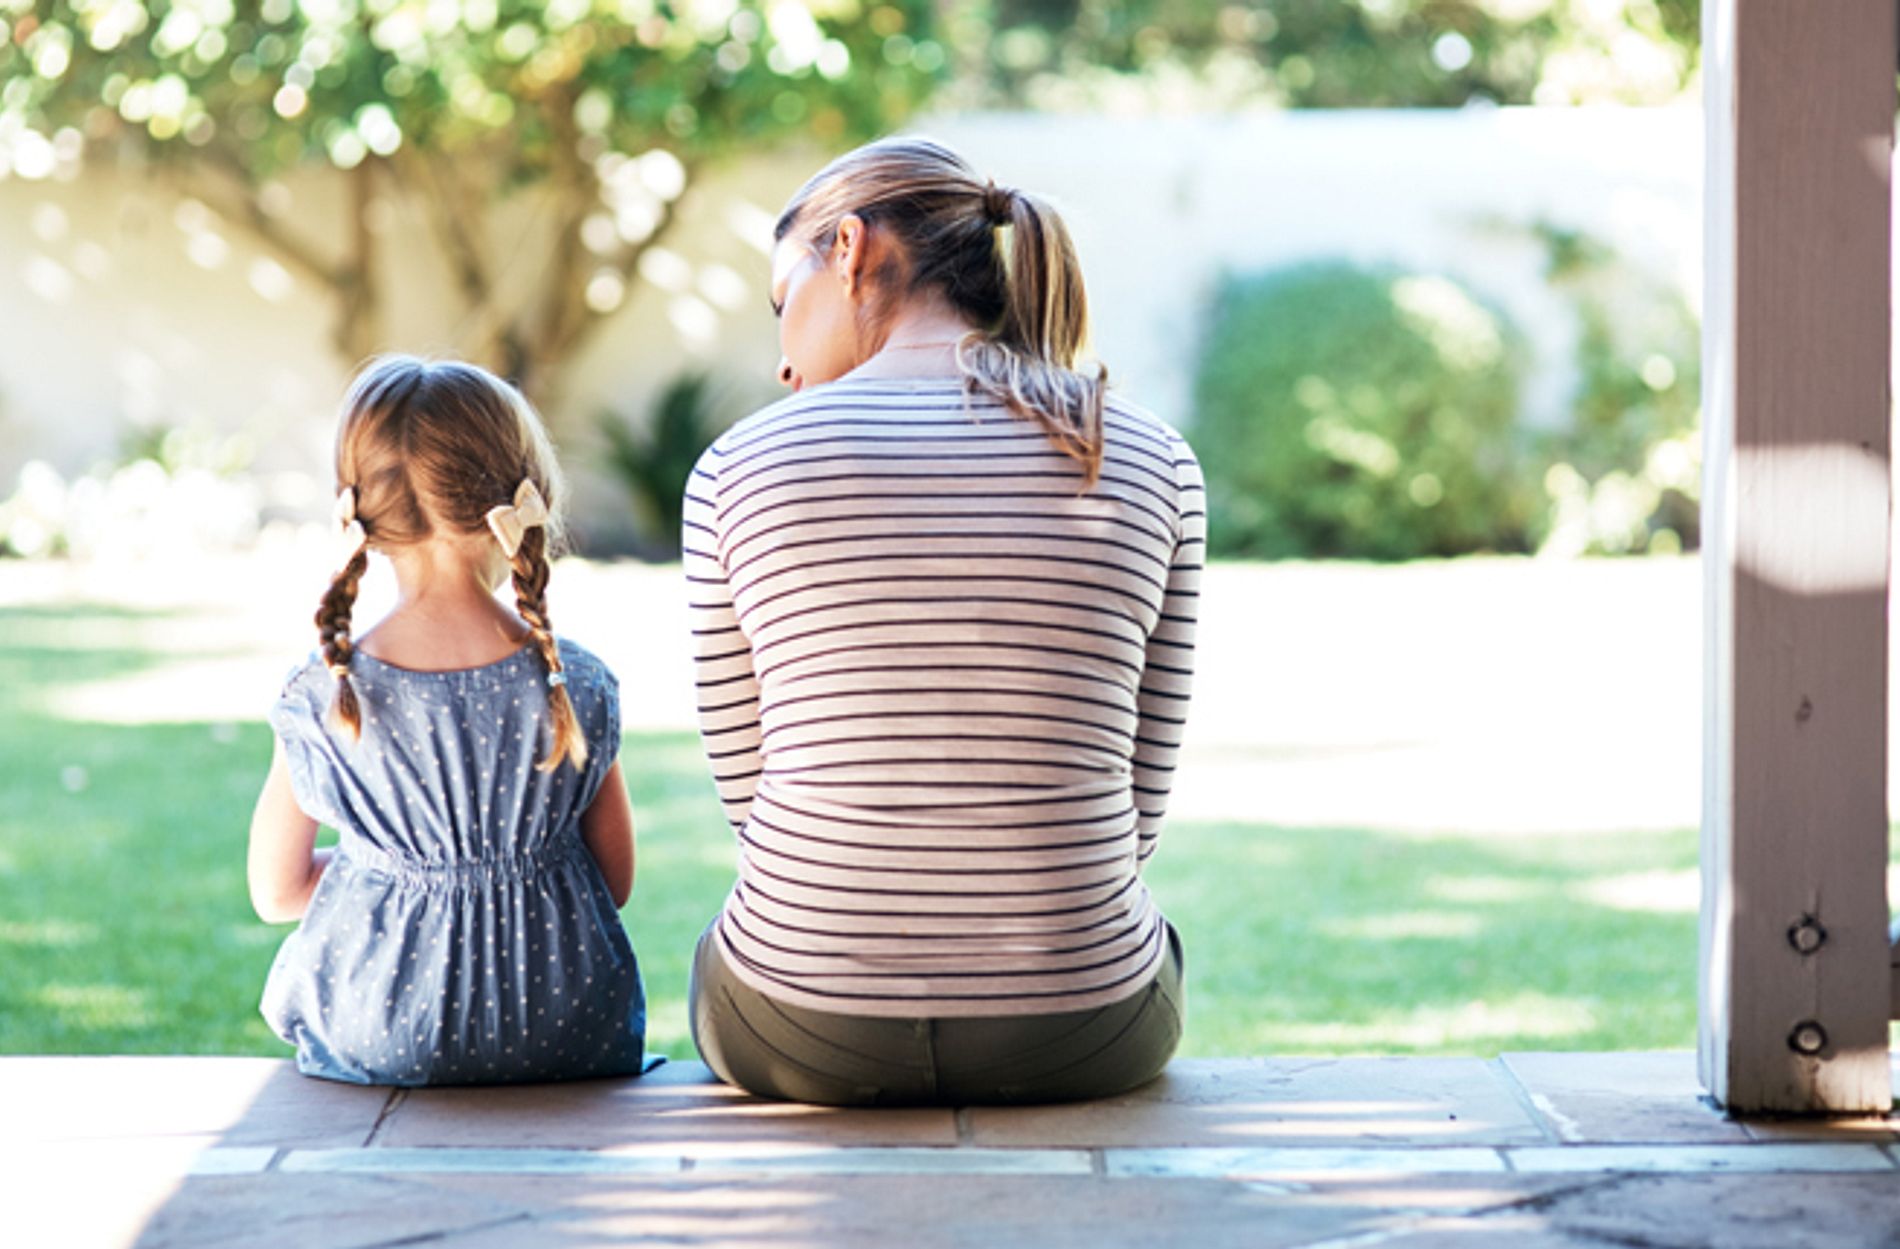 Rearview shot of a young woman and her daughter having a conversation on the porch.